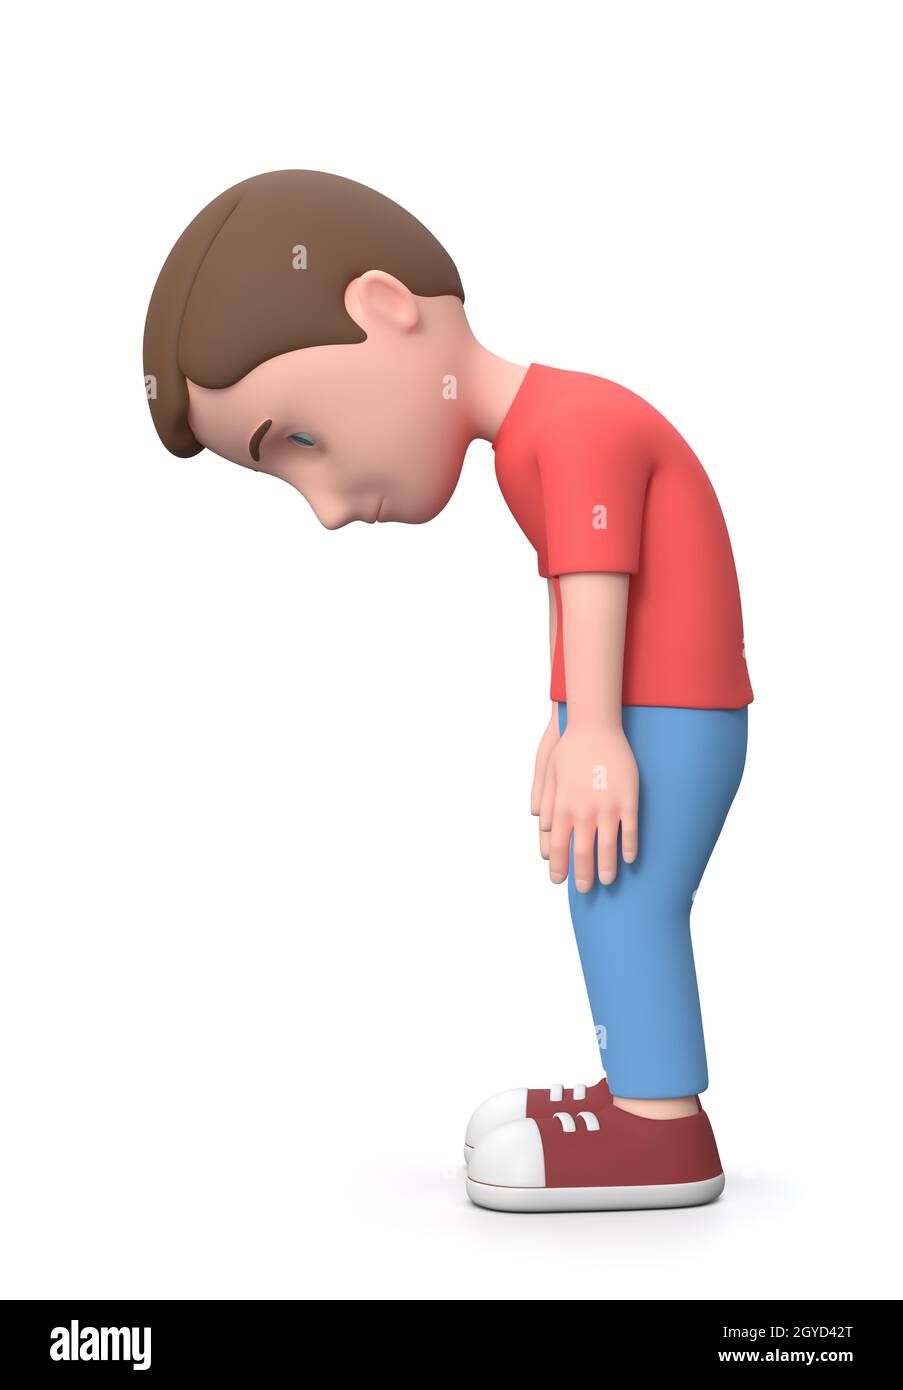 Sad Young Kid. 3D Cartoon Character Isolated on White Background 3D Illustration, Side View, Discouragement Concept Stock Photo